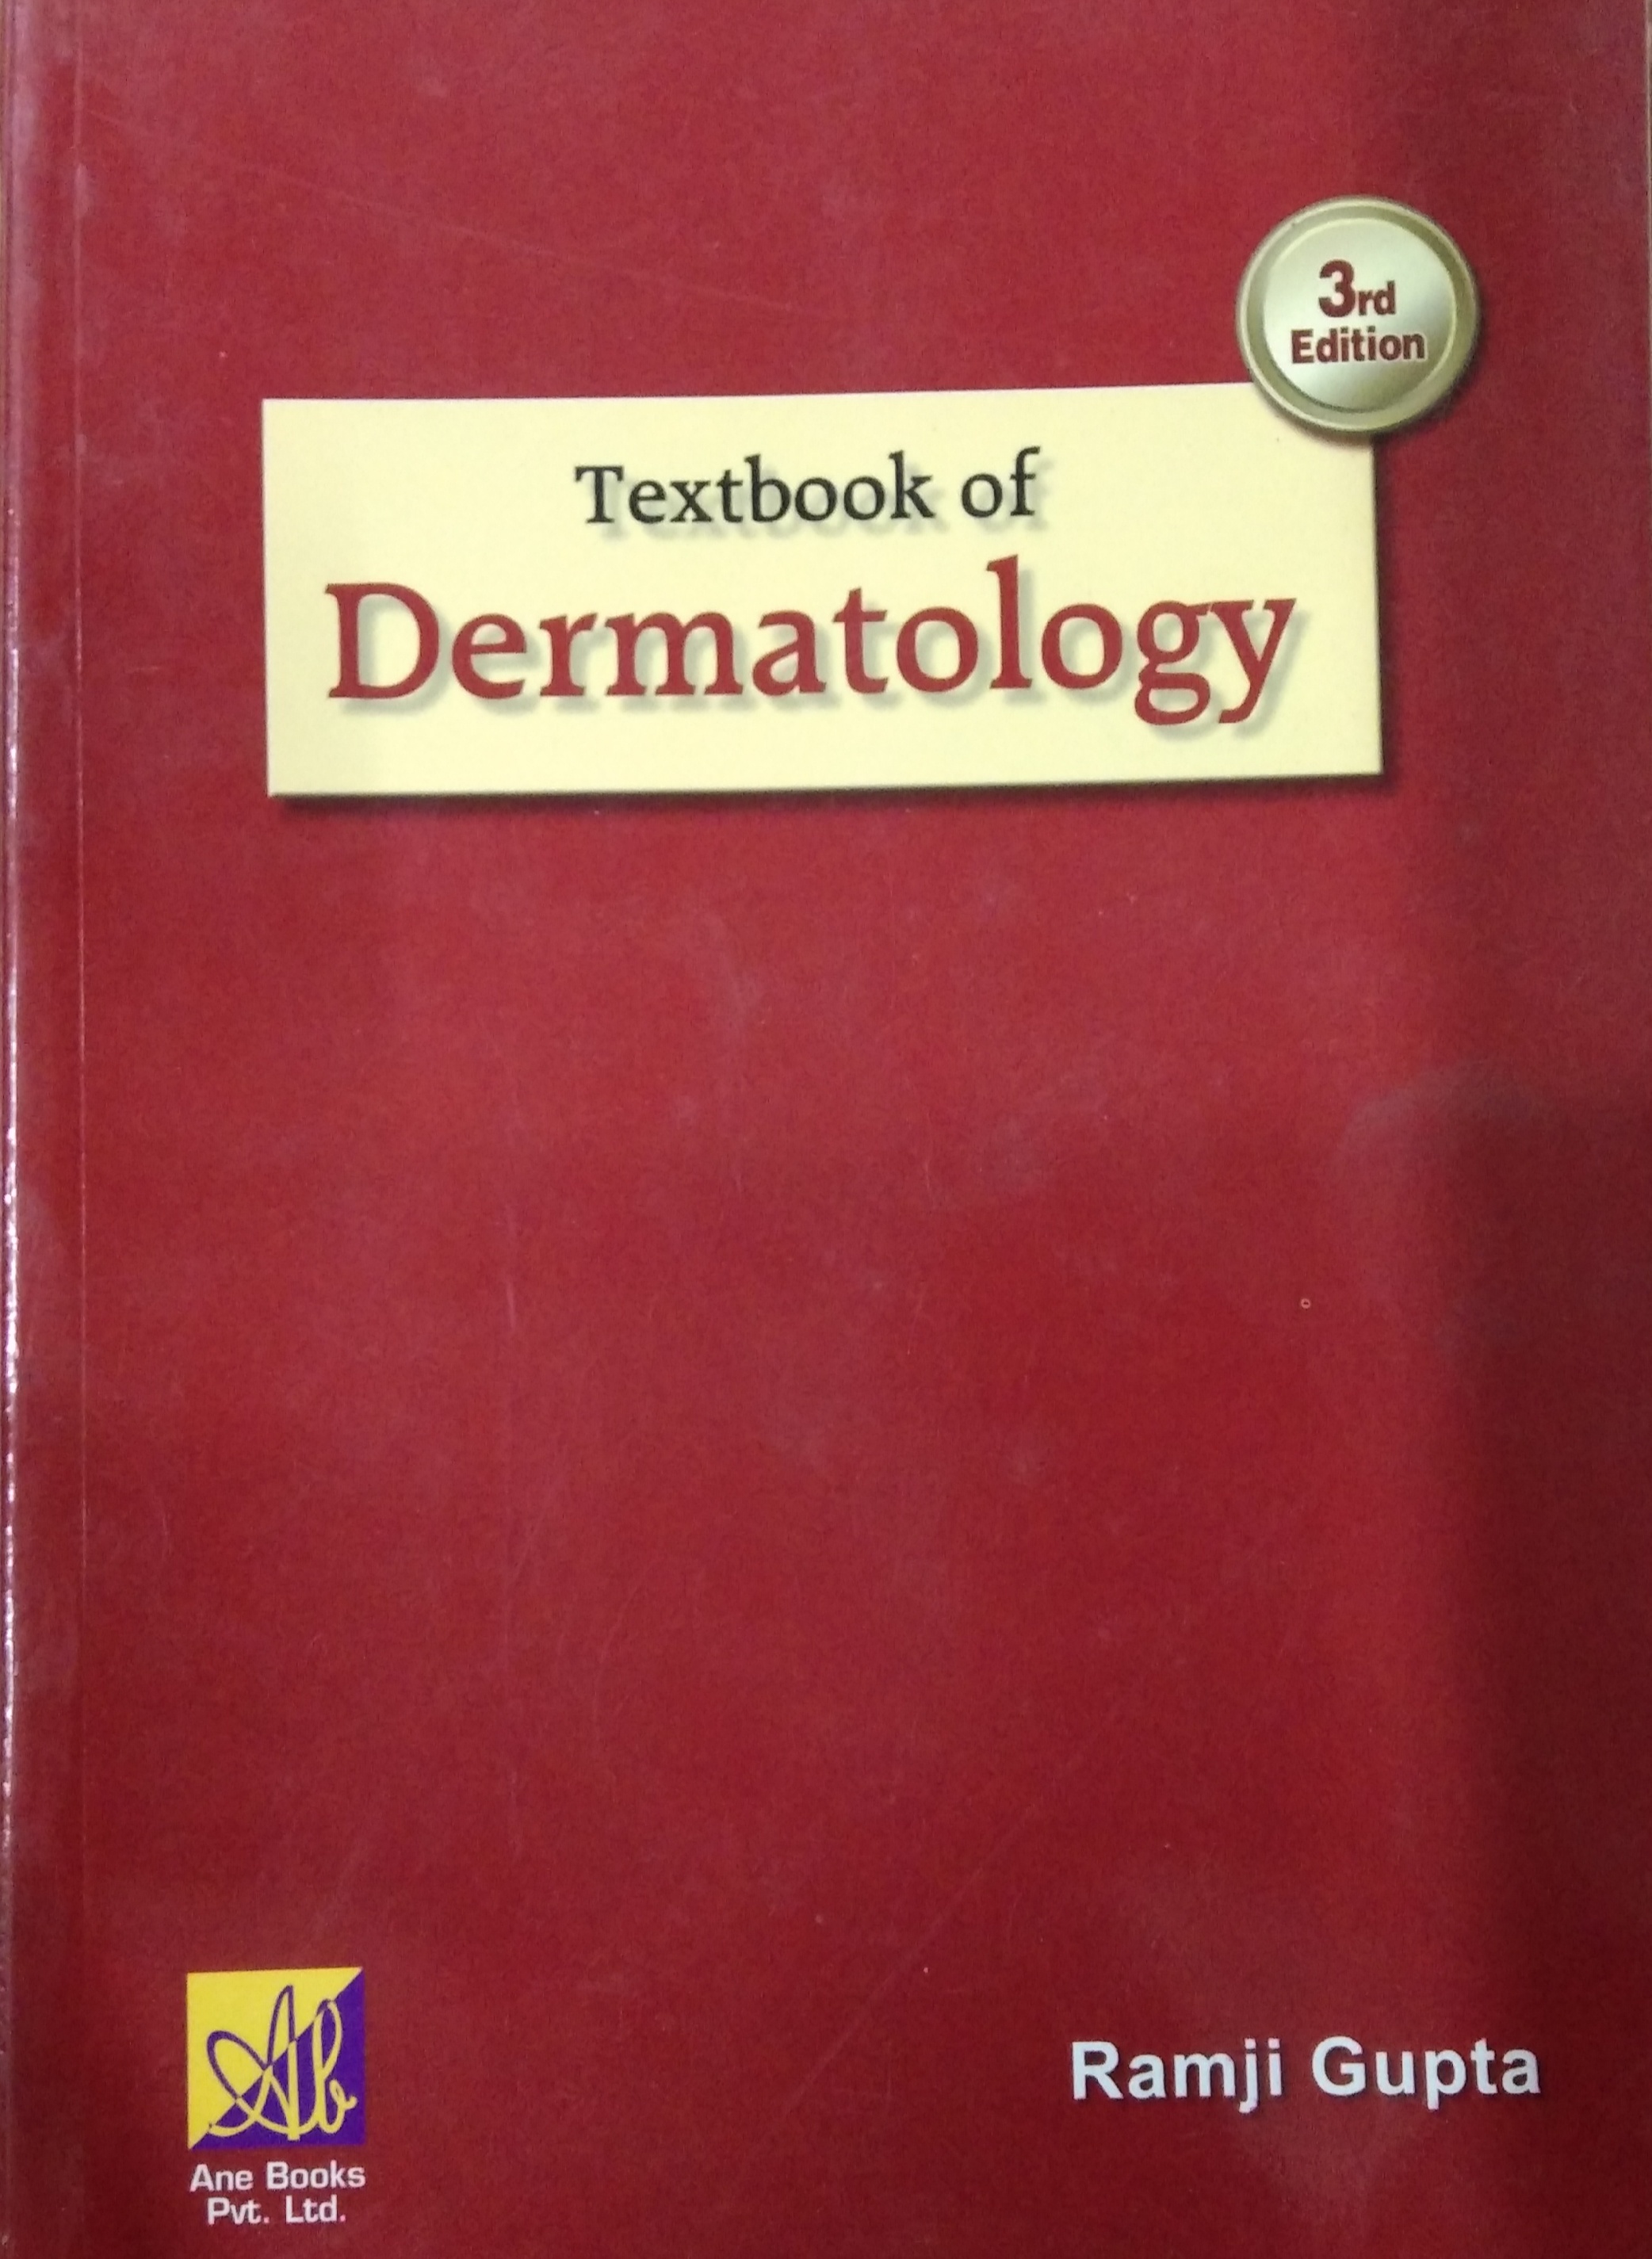 

exclusive-publishers/other/textbook-of-dermatology-3ed--9789381162095